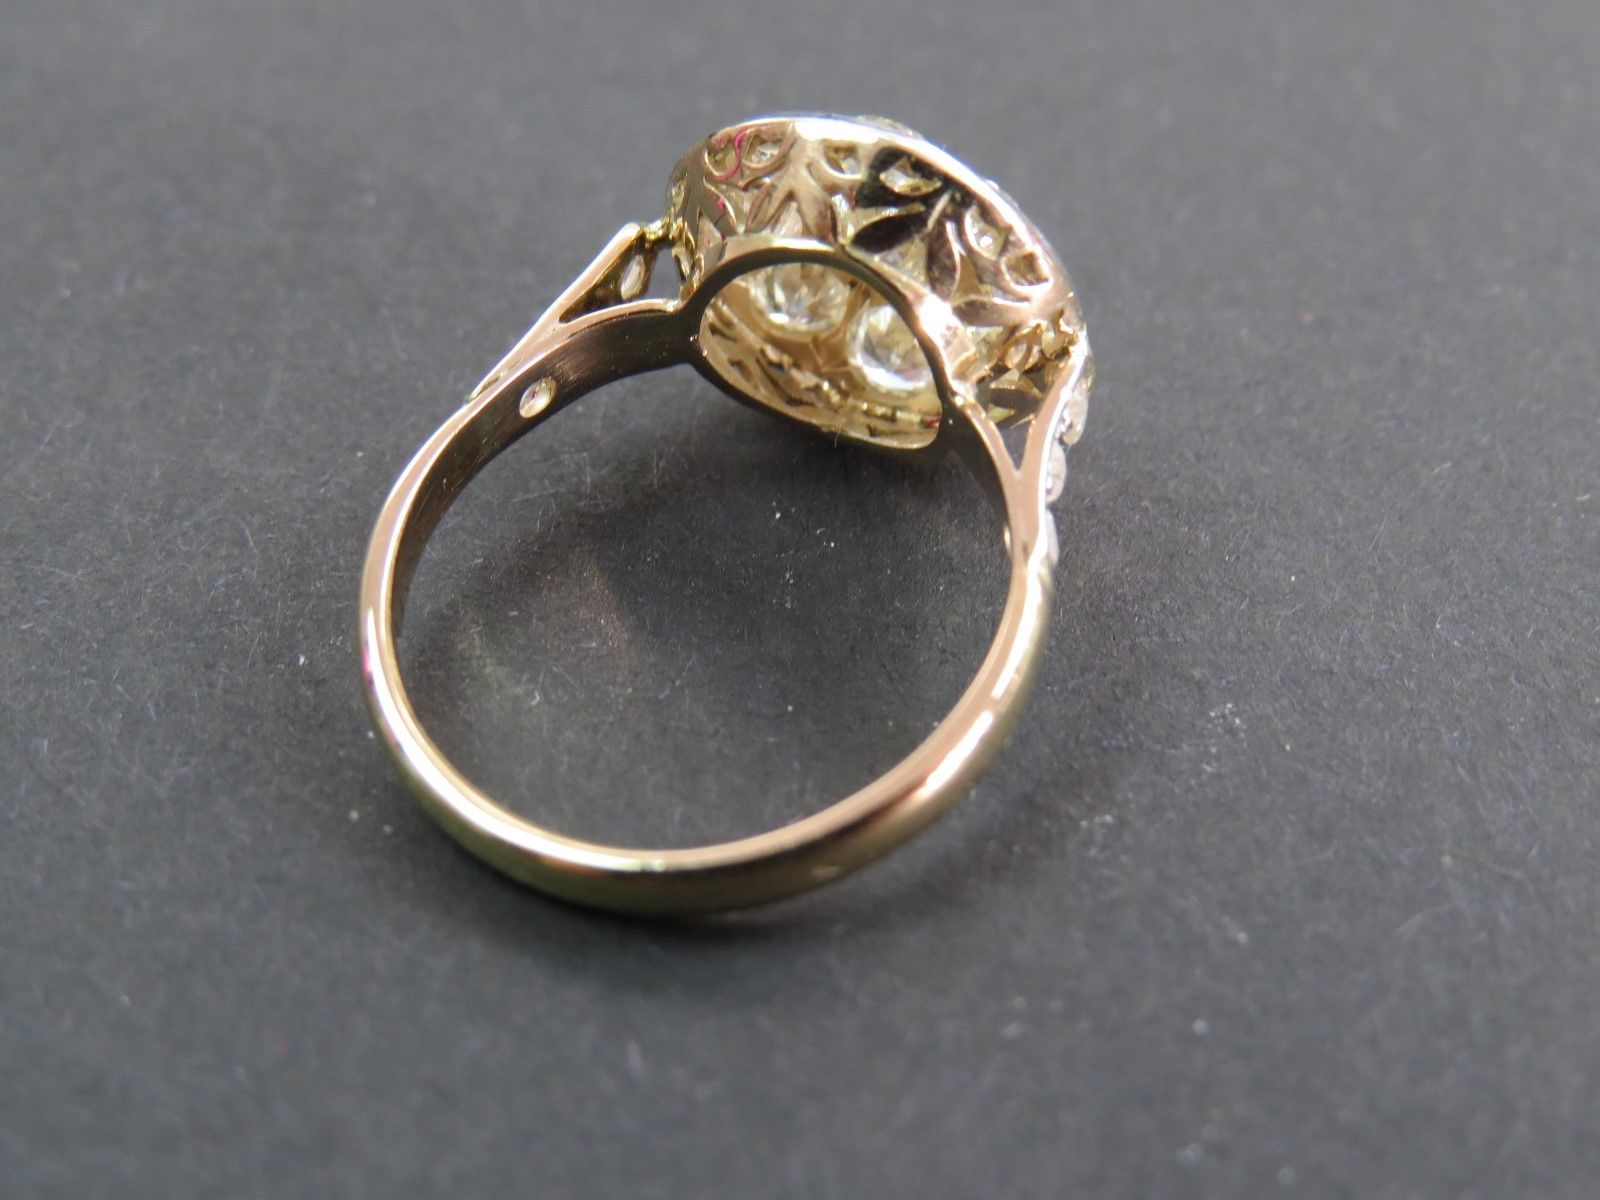 Withdrawn Lot Antique Edwardian 18ct Gold 1.3ct Diamond Cluster Ring C.1910 - Image 3 of 7